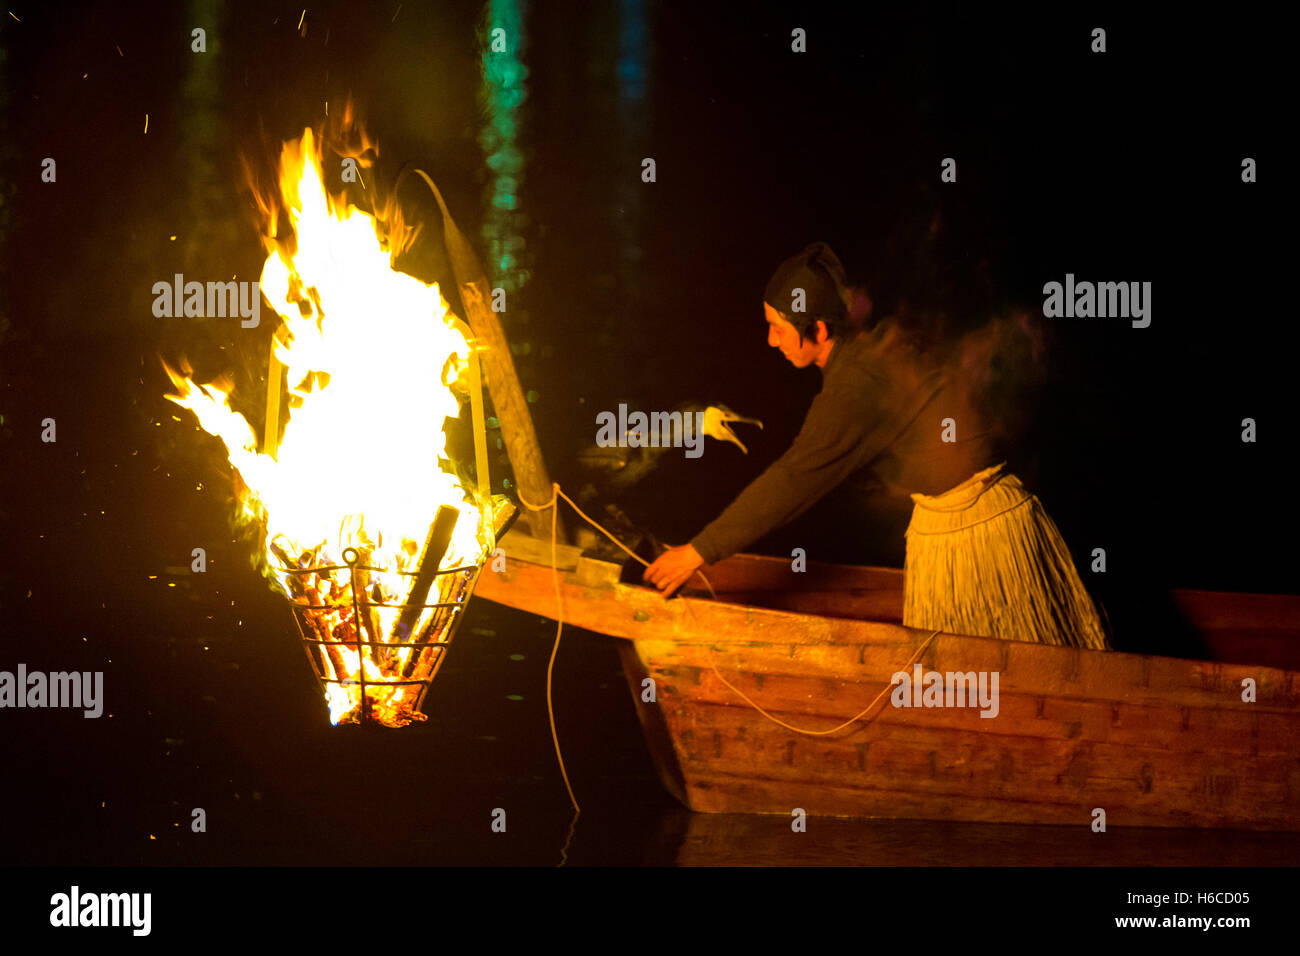 Japanese man in grass skirt, wooden boat, prepares a cormorant bird for ukai fishing drawing fish by a large flame at night Stock Photo